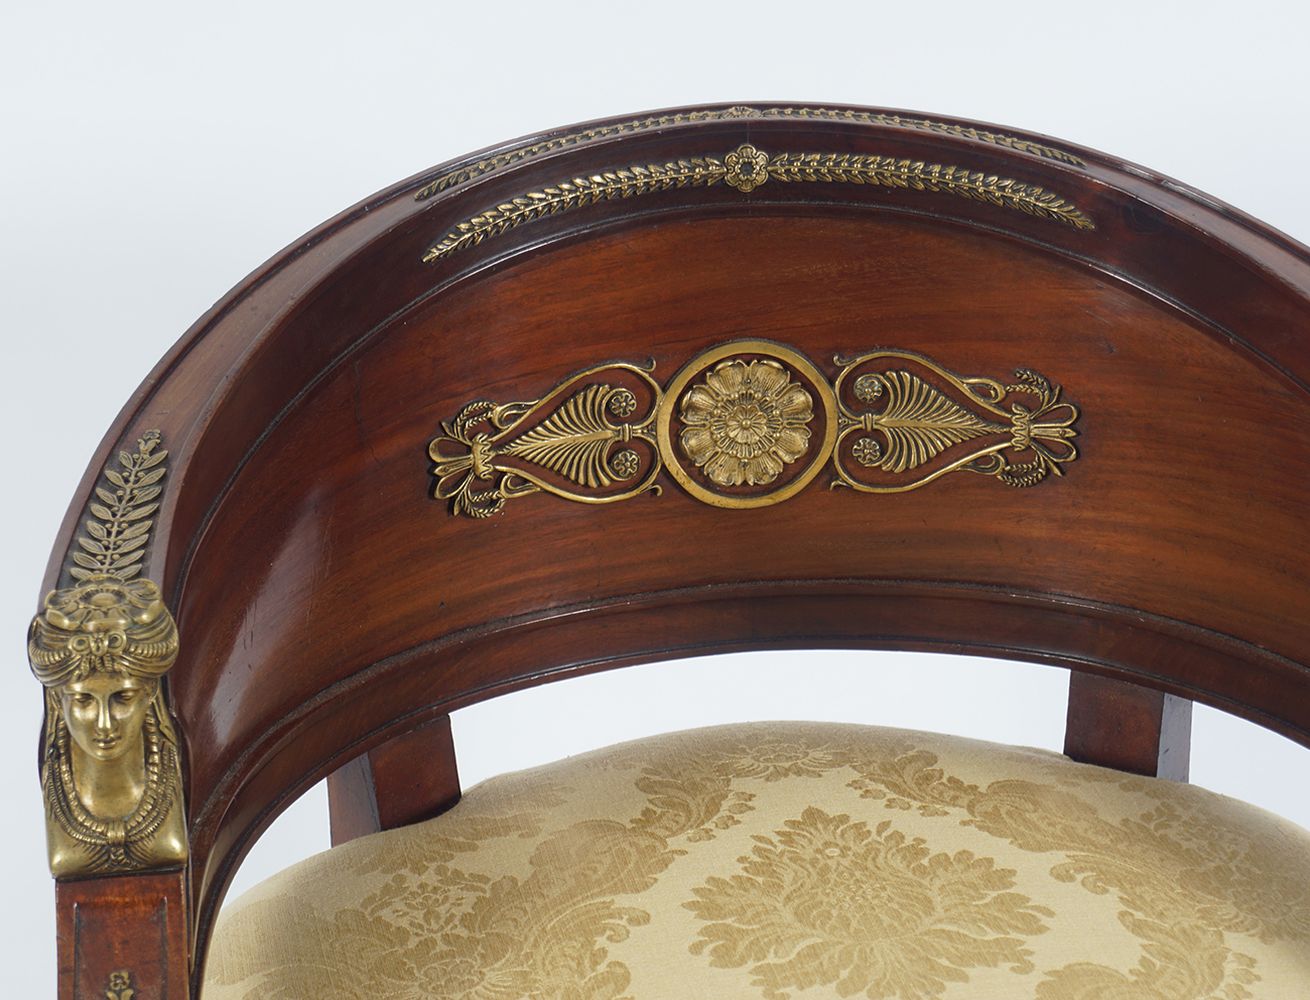 19TH-CENTURY MAHOGANY AND ORMOLU LIBRARY CHAIR - Image 2 of 3